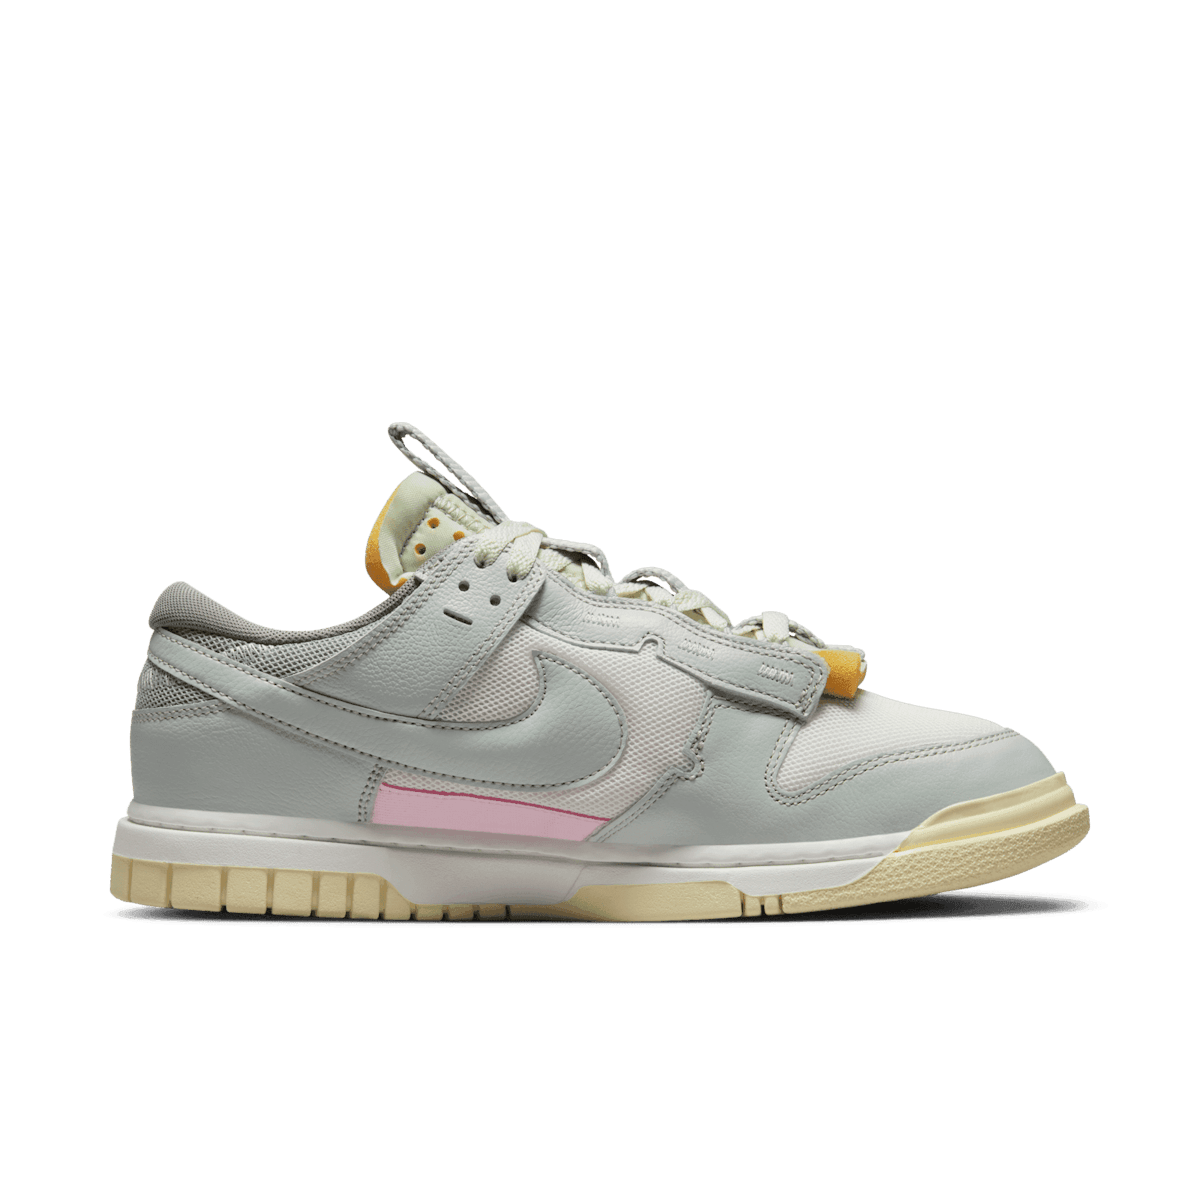 Nike Dunk Low Remastered Light Silver Pink Foam Angle 1